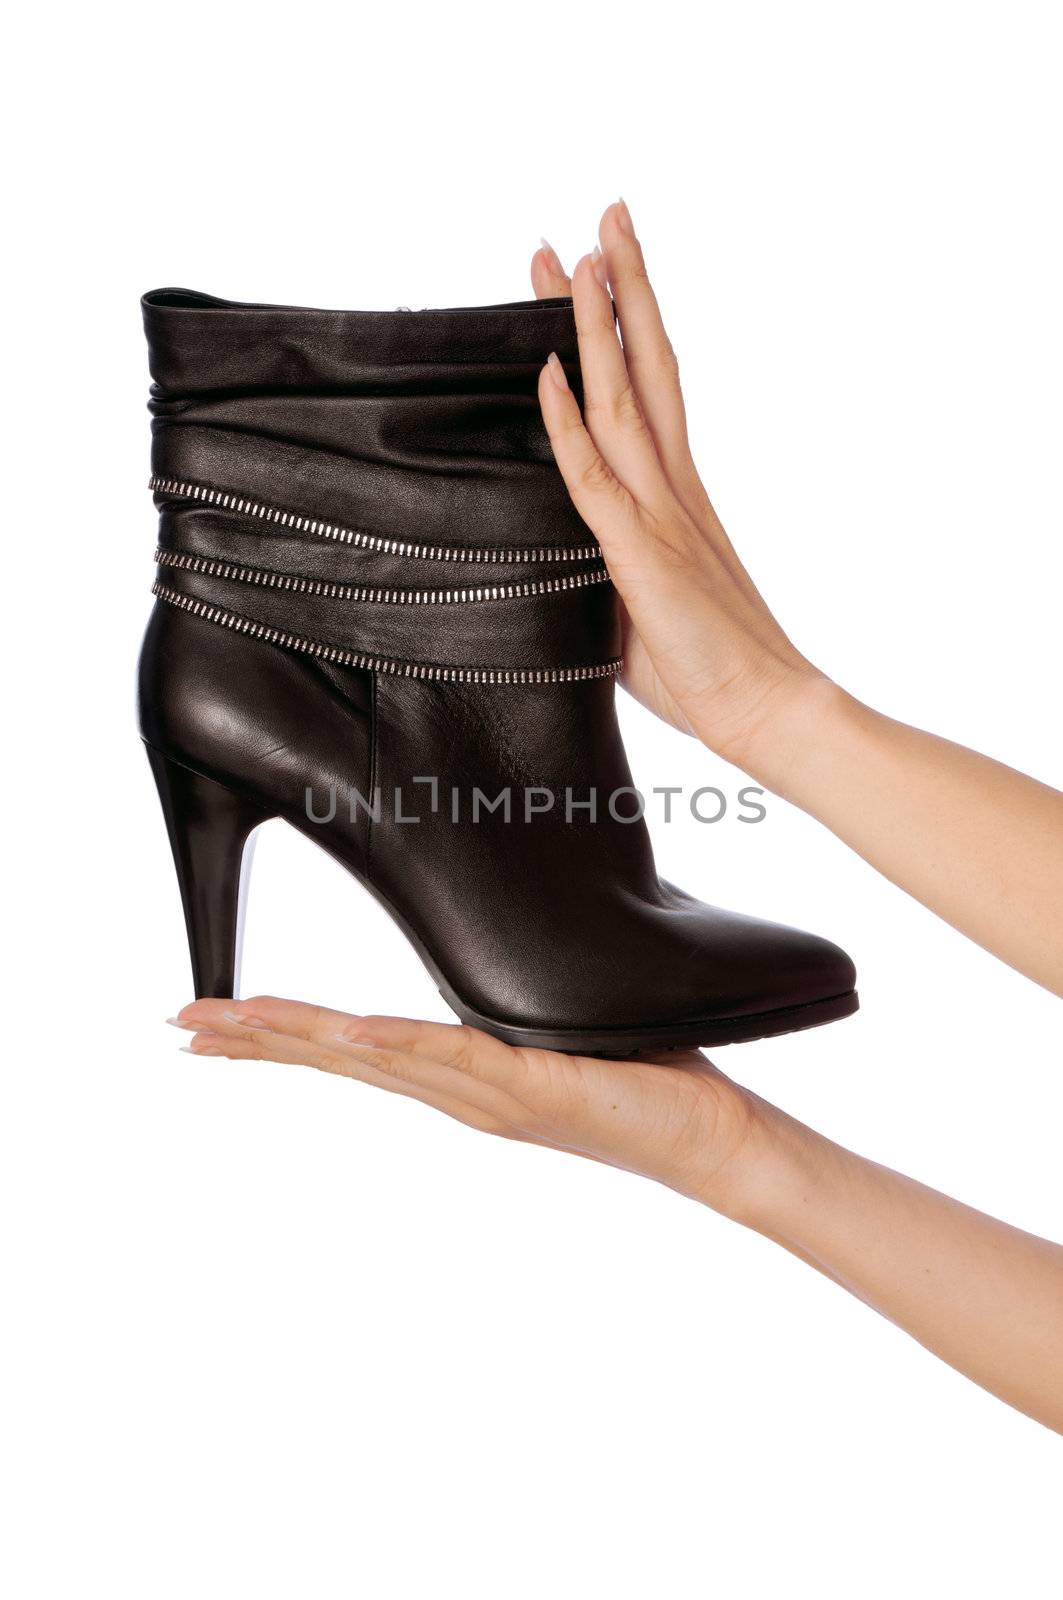 Black female boots in hands at the saleswoman